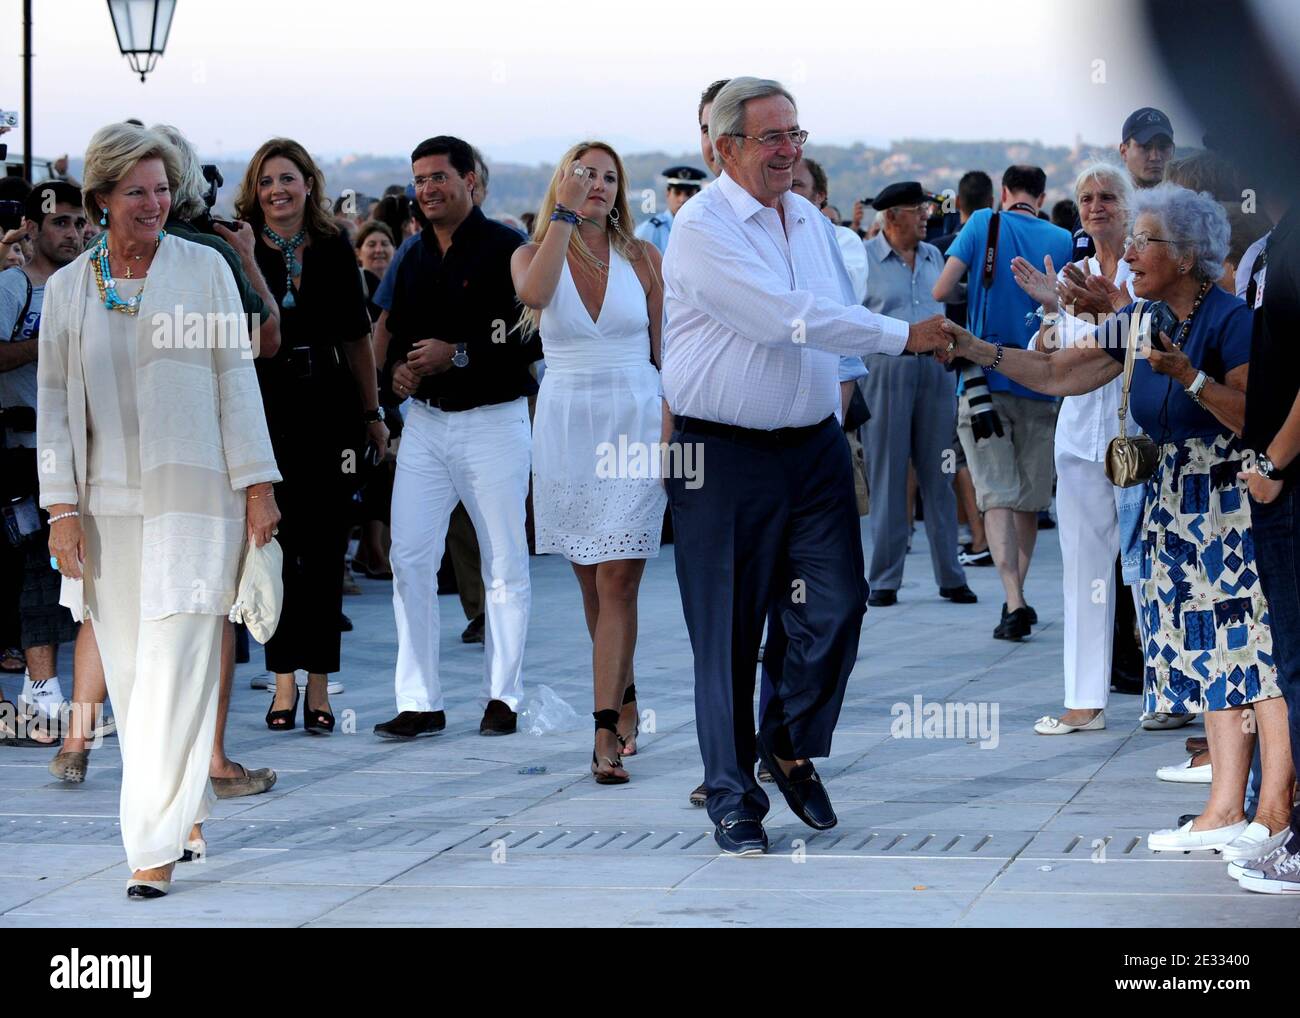 Princess Alexia High Resolution Stock Photography And Images Alamy Christophe willem sort (deja) son troisieme album. https www alamy com king constantine of greece queen anne marie princess alexia and her husband carlos morales quintana prince nikolaos of greece and fiancee tatiana blatnik prince philipos attend a party prior to the wedding of prince nikolaos of greece and tatiana blatnik at the poseidon hotel on spetses island greece the couple will tie the knot on august 25 2010 photo by christophe guibbaudabacapresscom image397751424 html